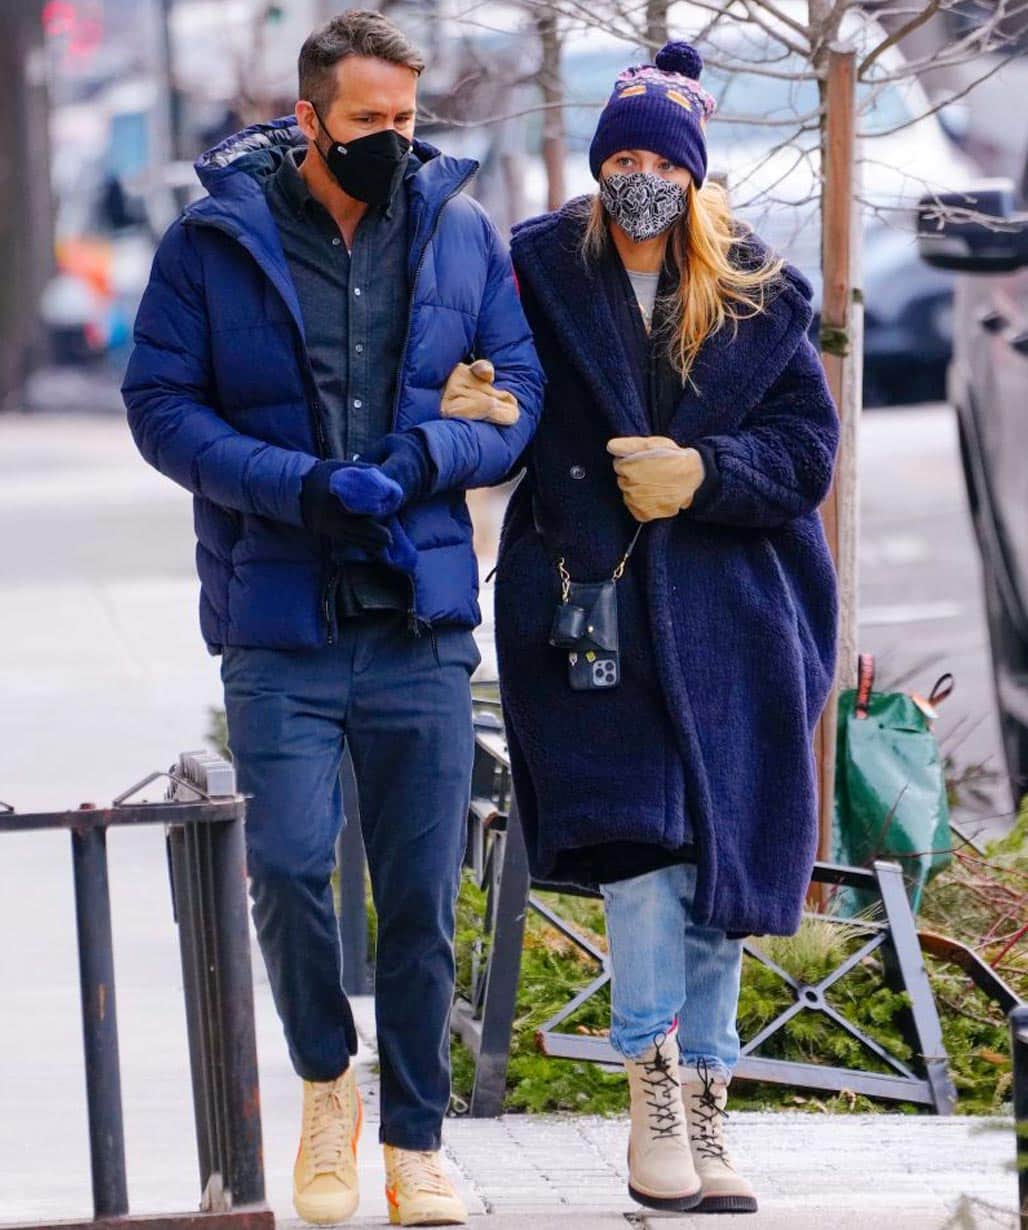 Ryan-Reynolds-and-Blake-Lively-Outfit-Couple-Jacket